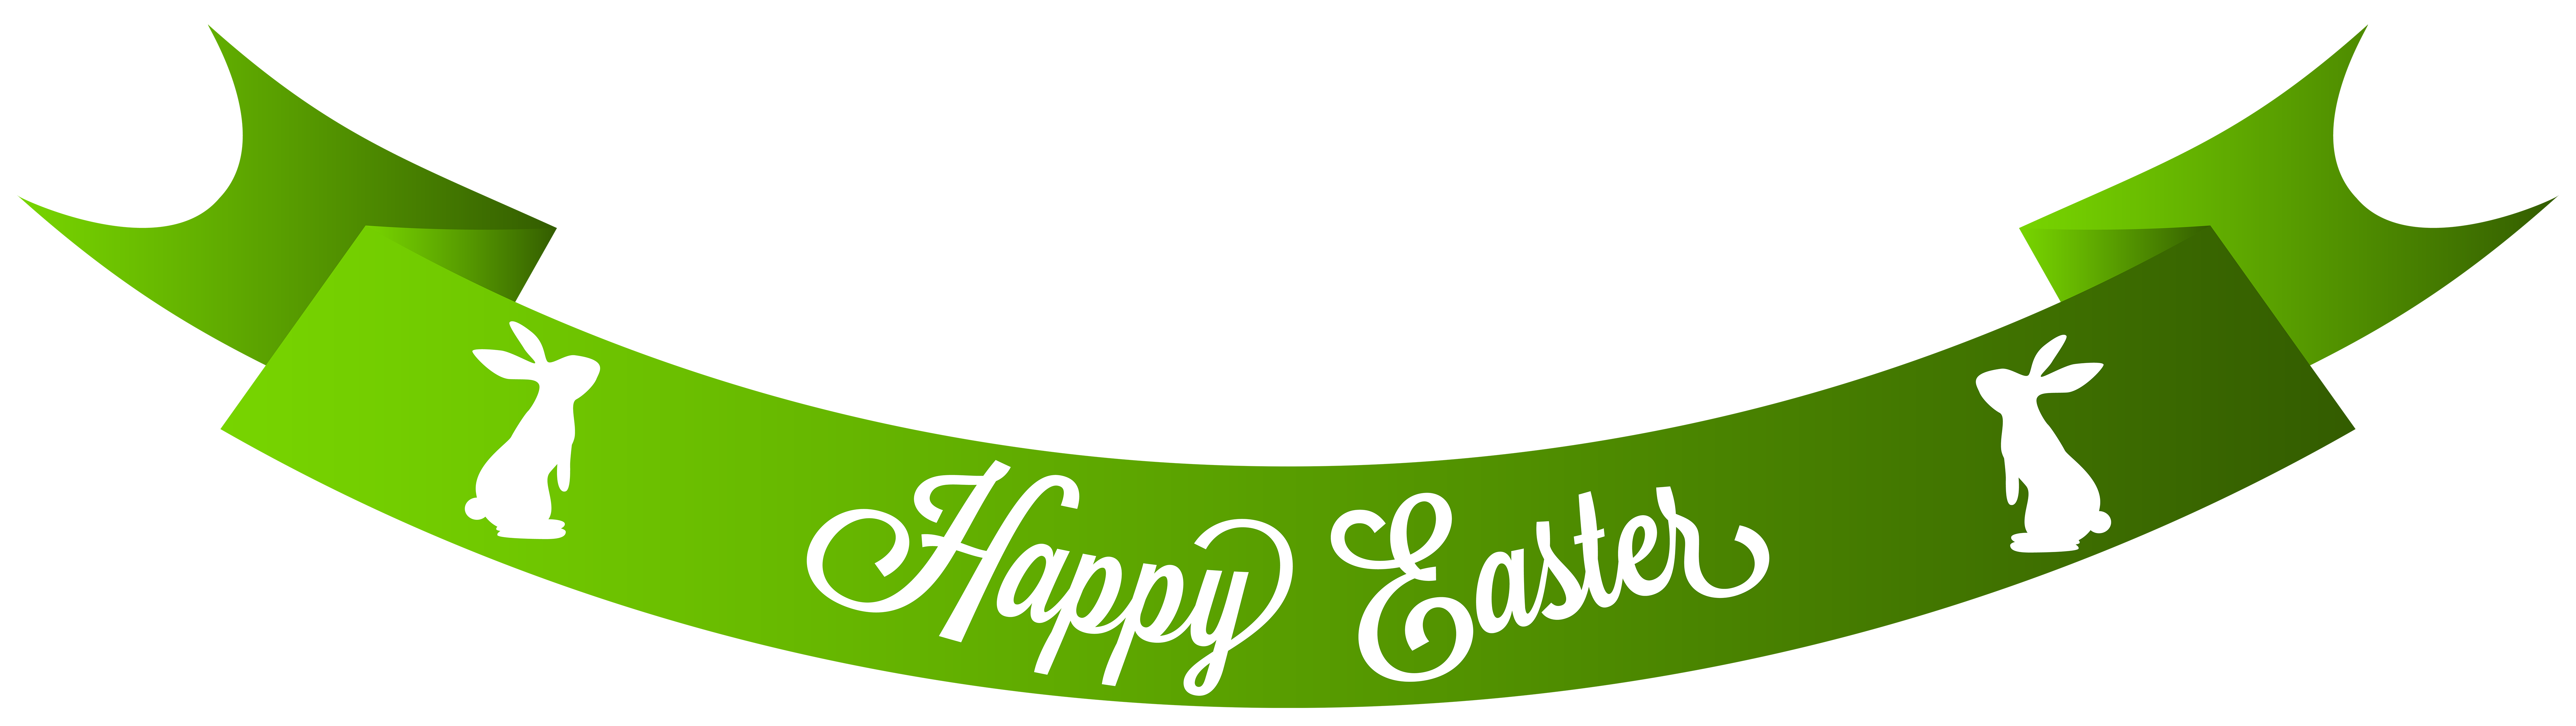 free easter banner clipart - photo #18